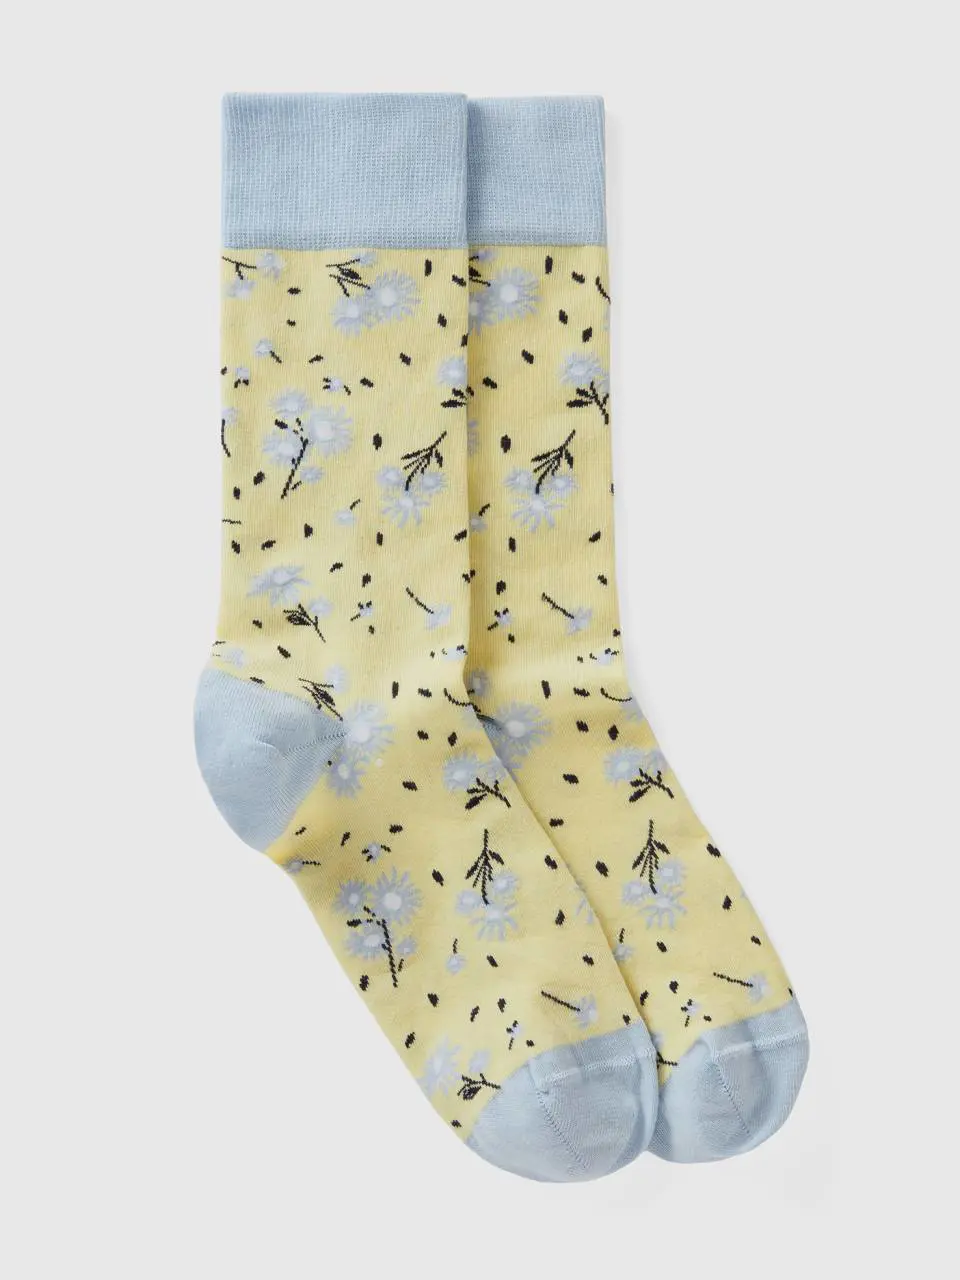 Benetton long yellow and light blue floral socks. 1